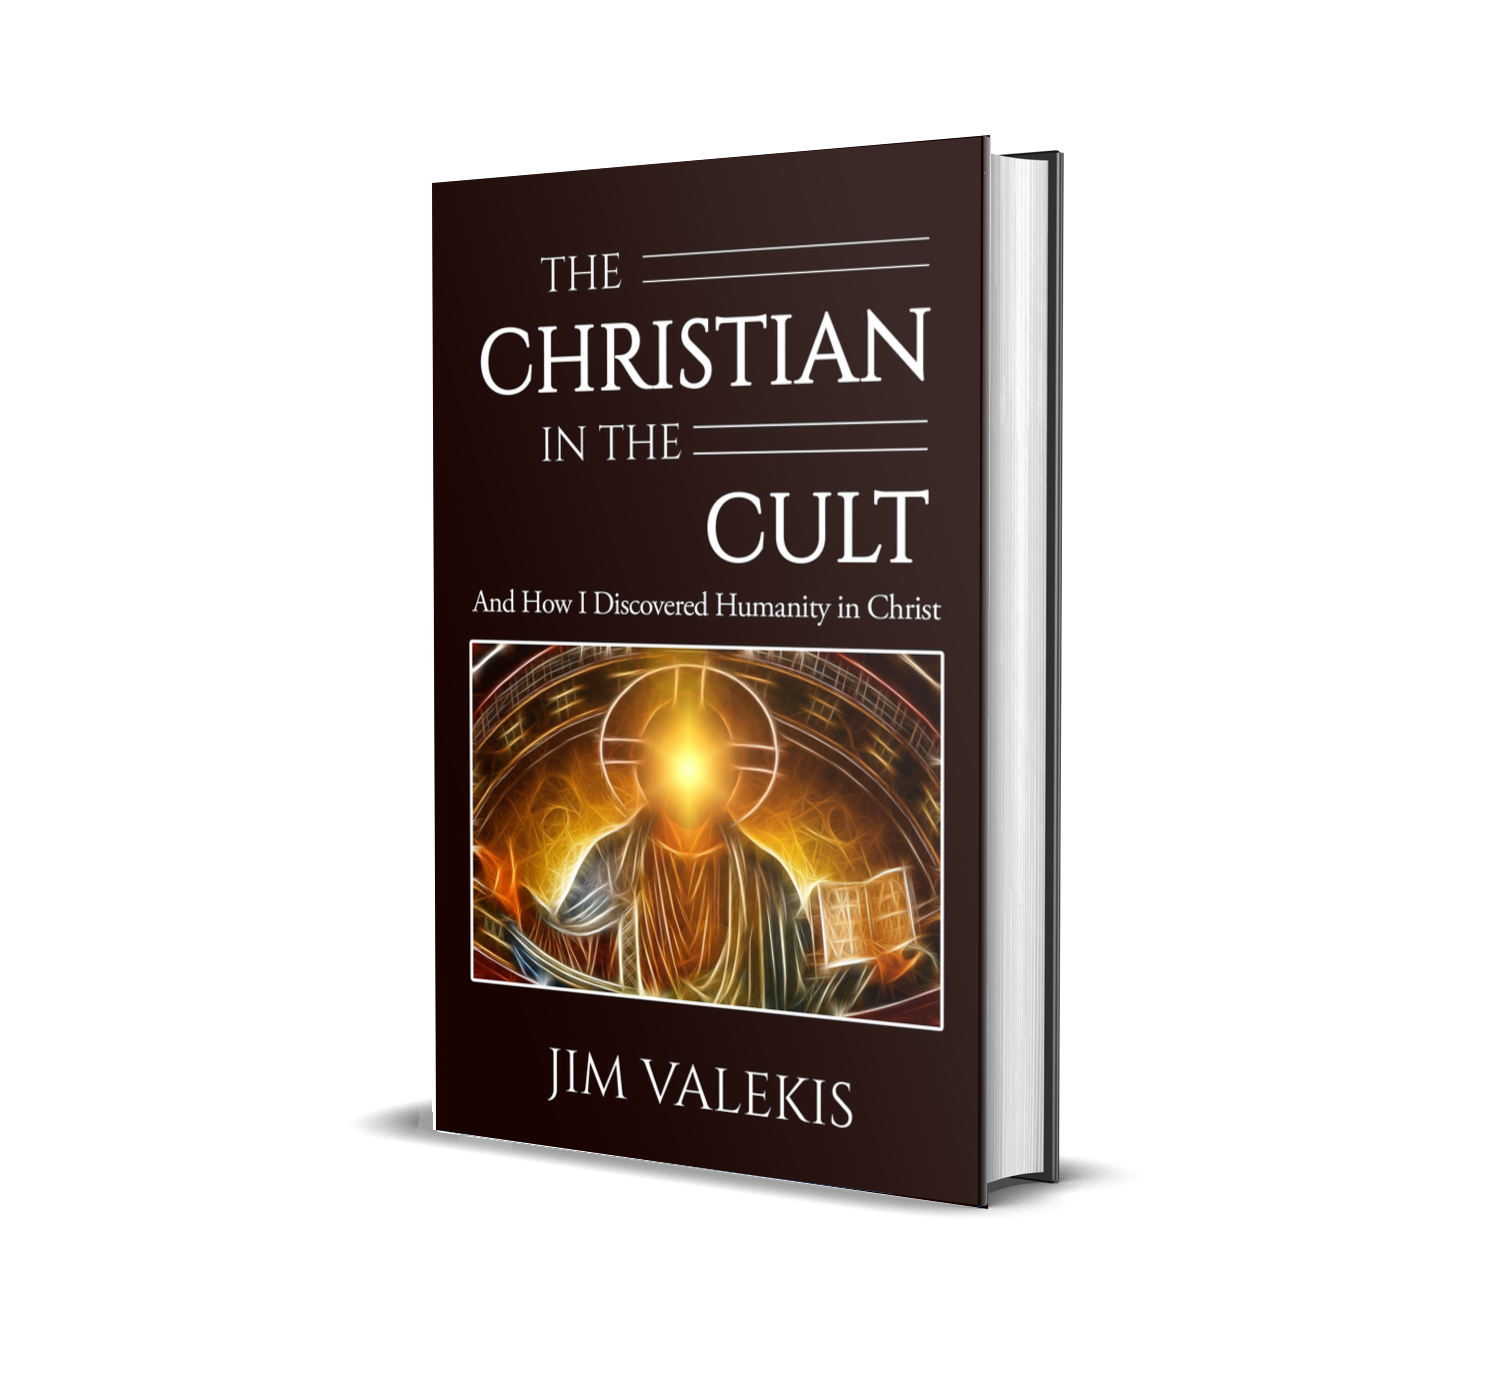 The Christian in the Cult - And How to Discover Humanity in Christ, By Jim Valekis